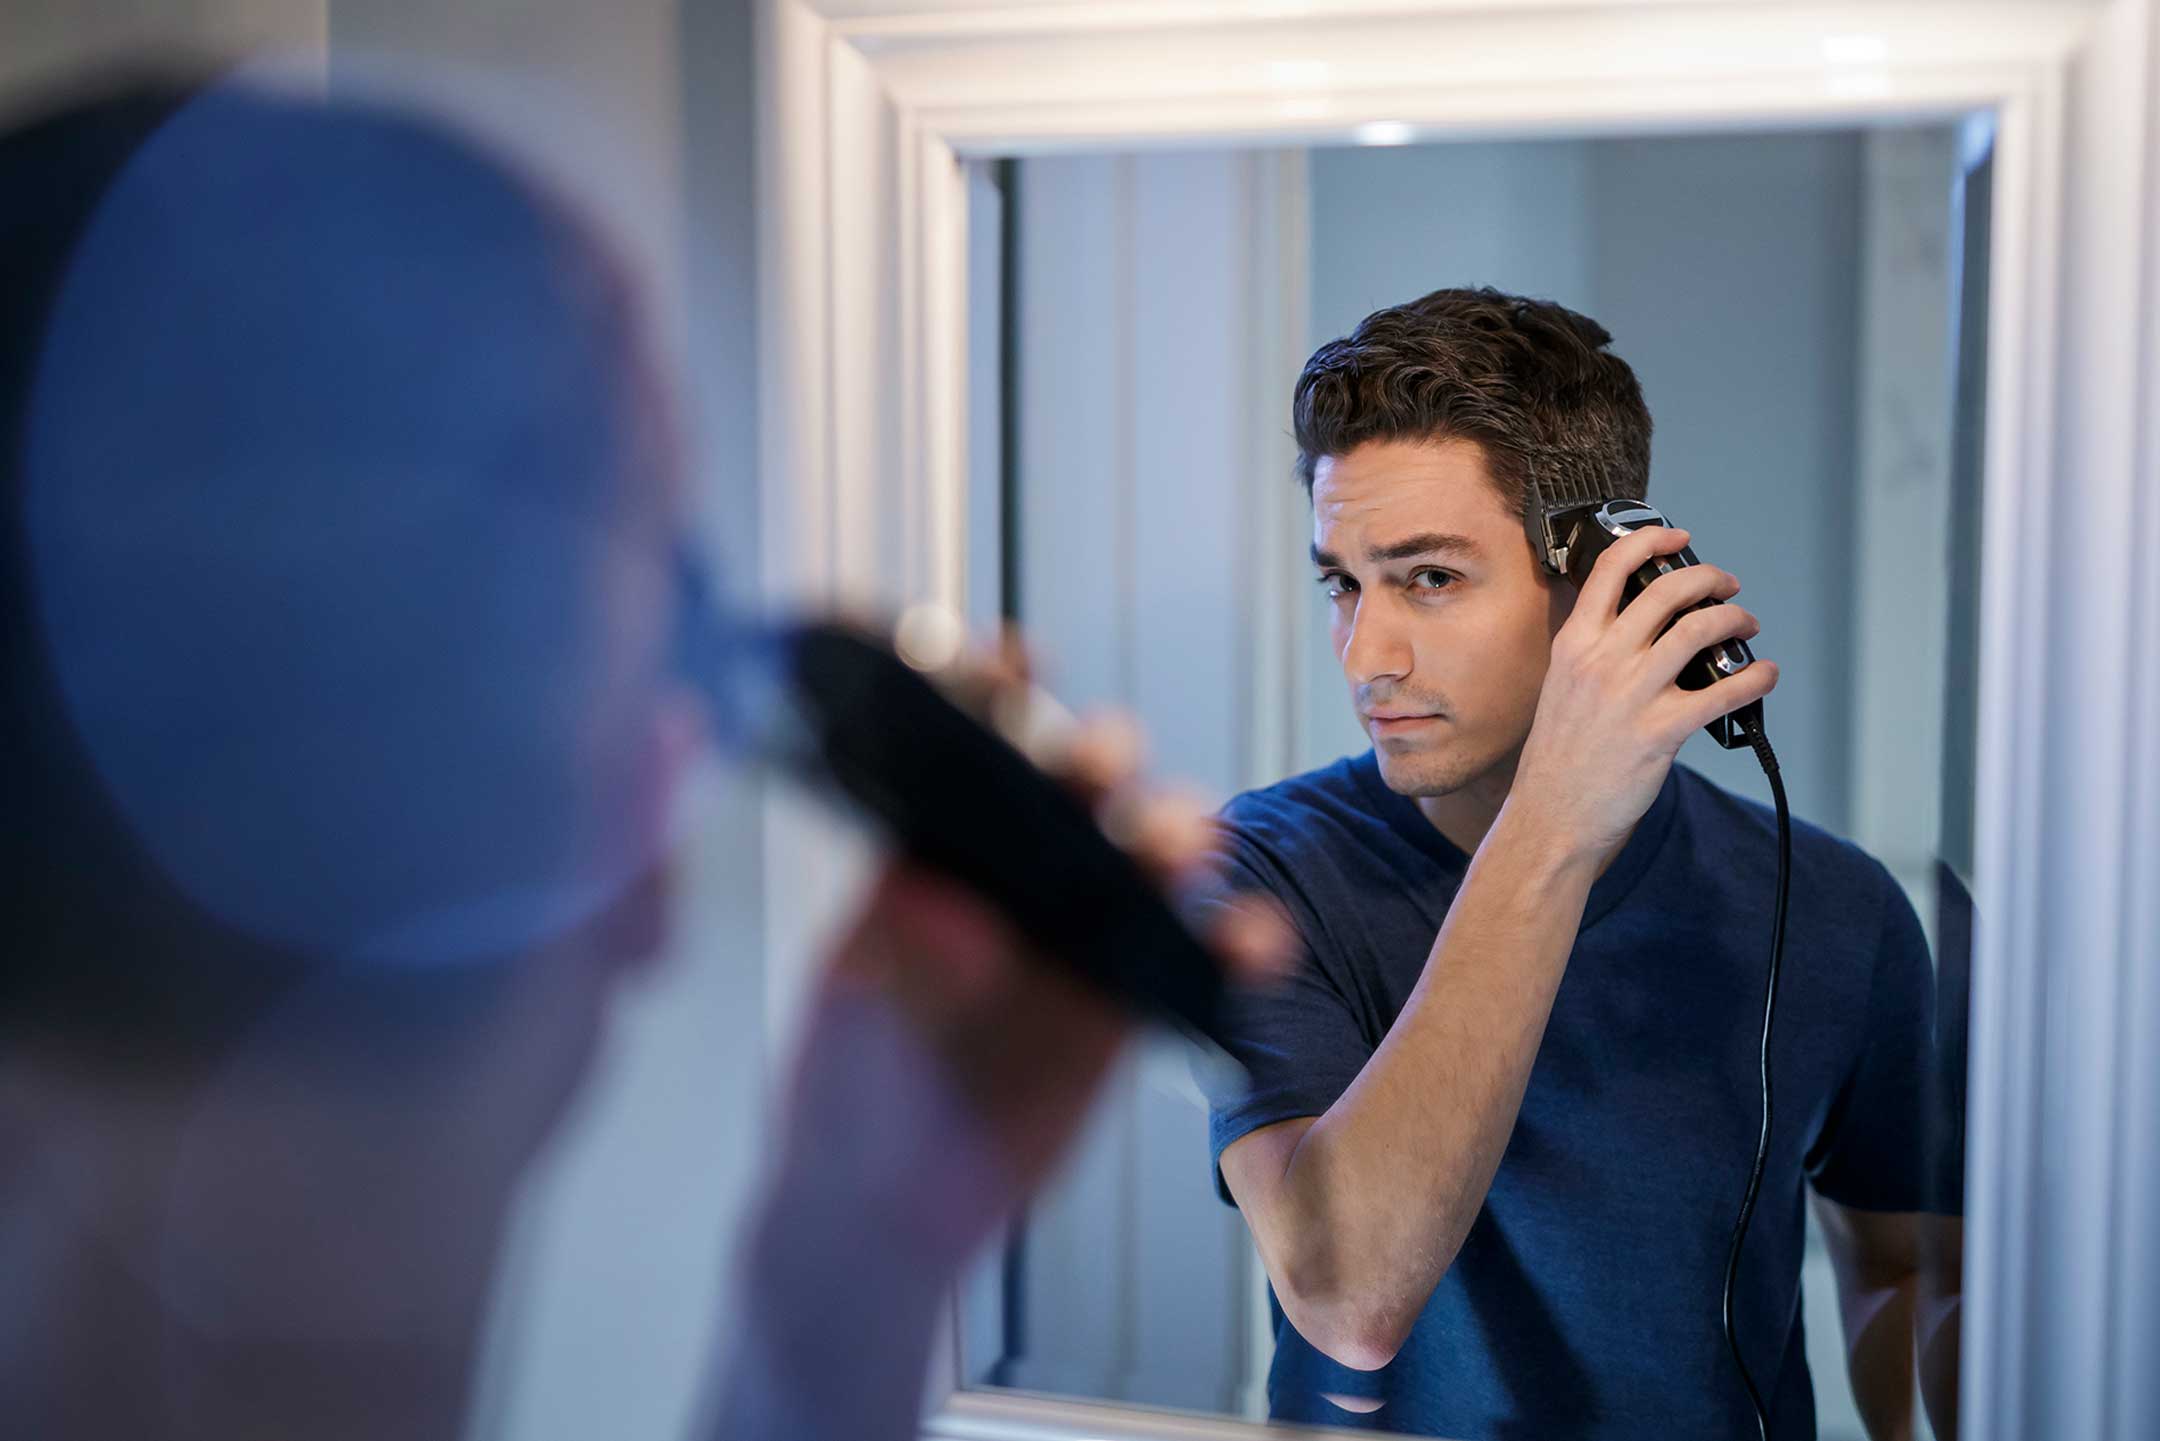 In the wake of sweeping COVID-19 changes like social distancing and the shuttering of businesses, home haircuts -- buzz cuts in particular -- are more popular than ever. Wahl, the company that invented the first handheld electric clipper 101 years ago, is here to help with tips and tools to get this look.